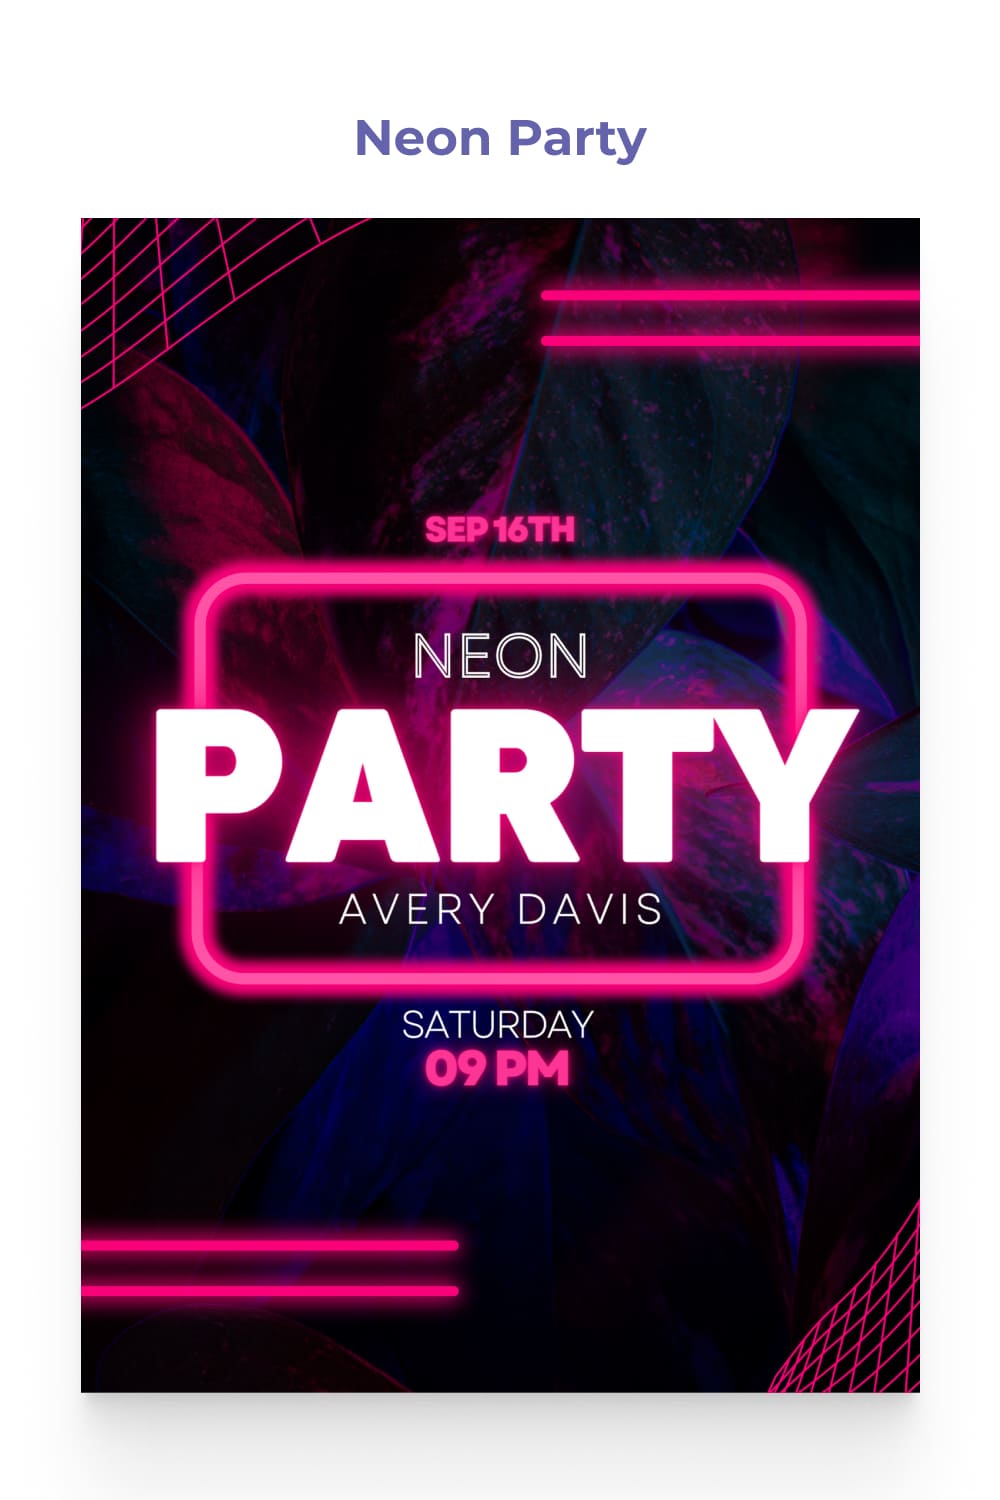 Party invitation with neon lines and text.